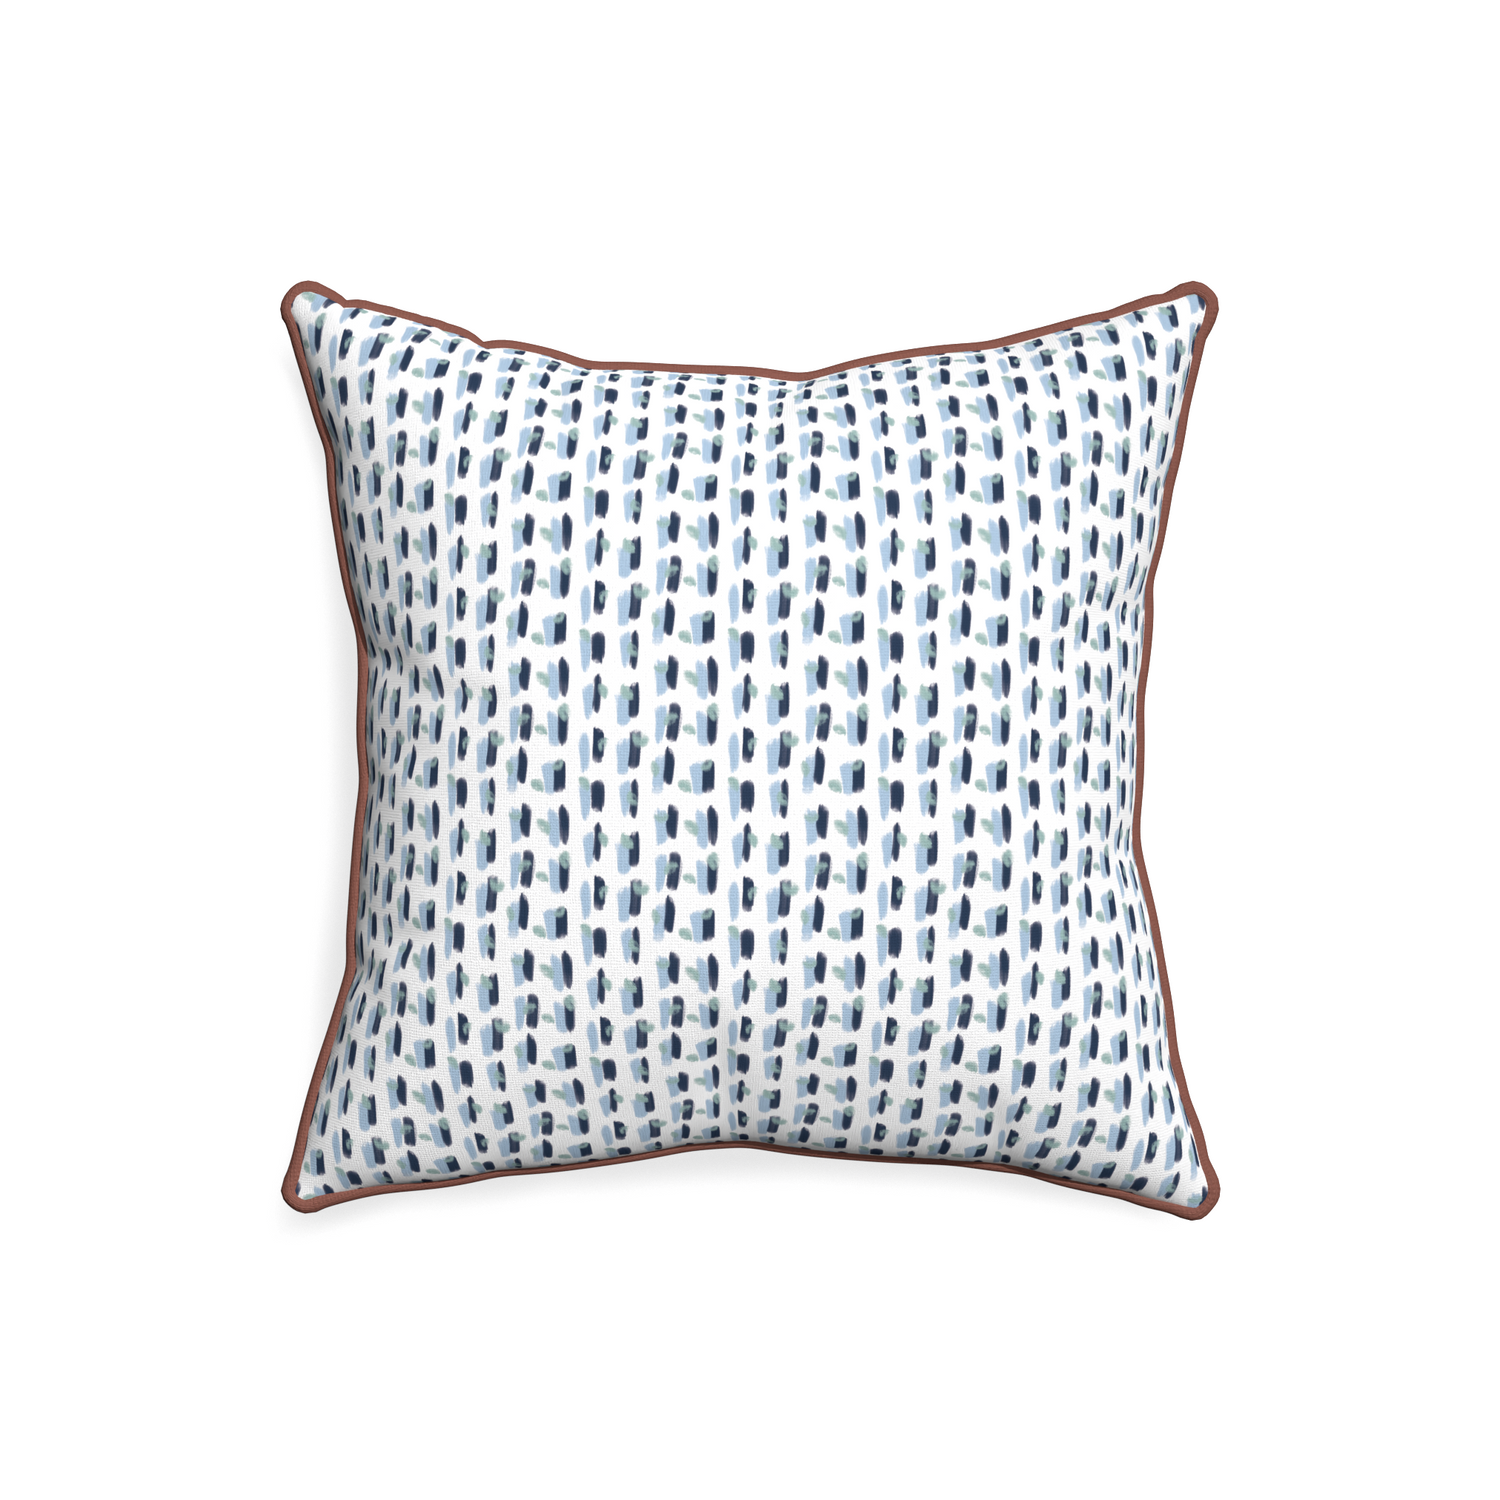 20-square poppy blue custom pillow with w piping on white background